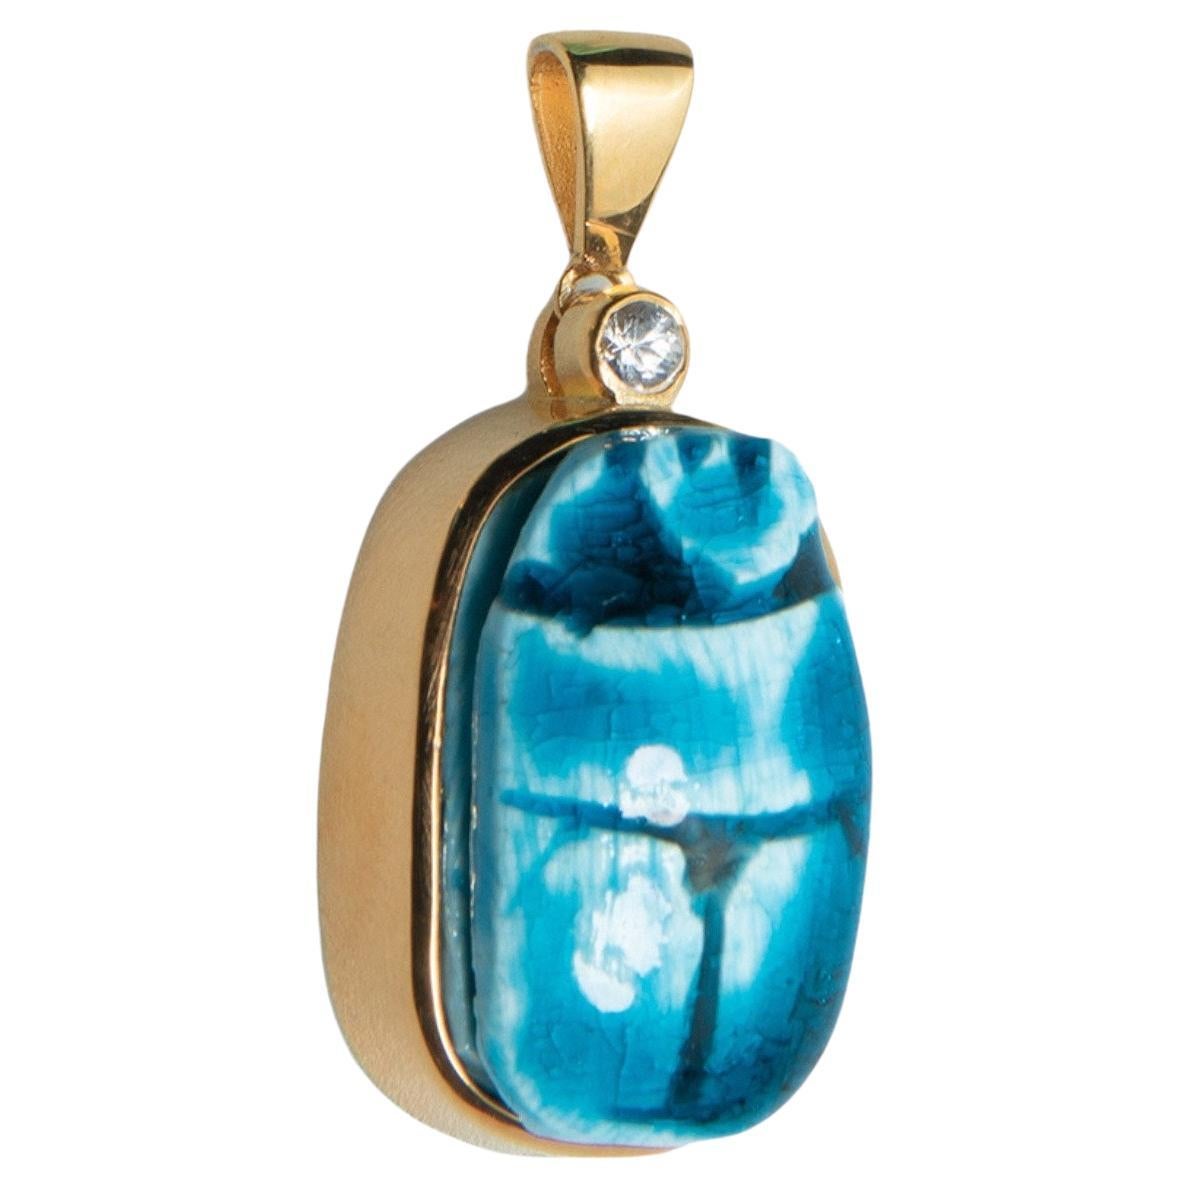 House of Sol Gold filled Silver Scarab Charm with Sapphire For Sale